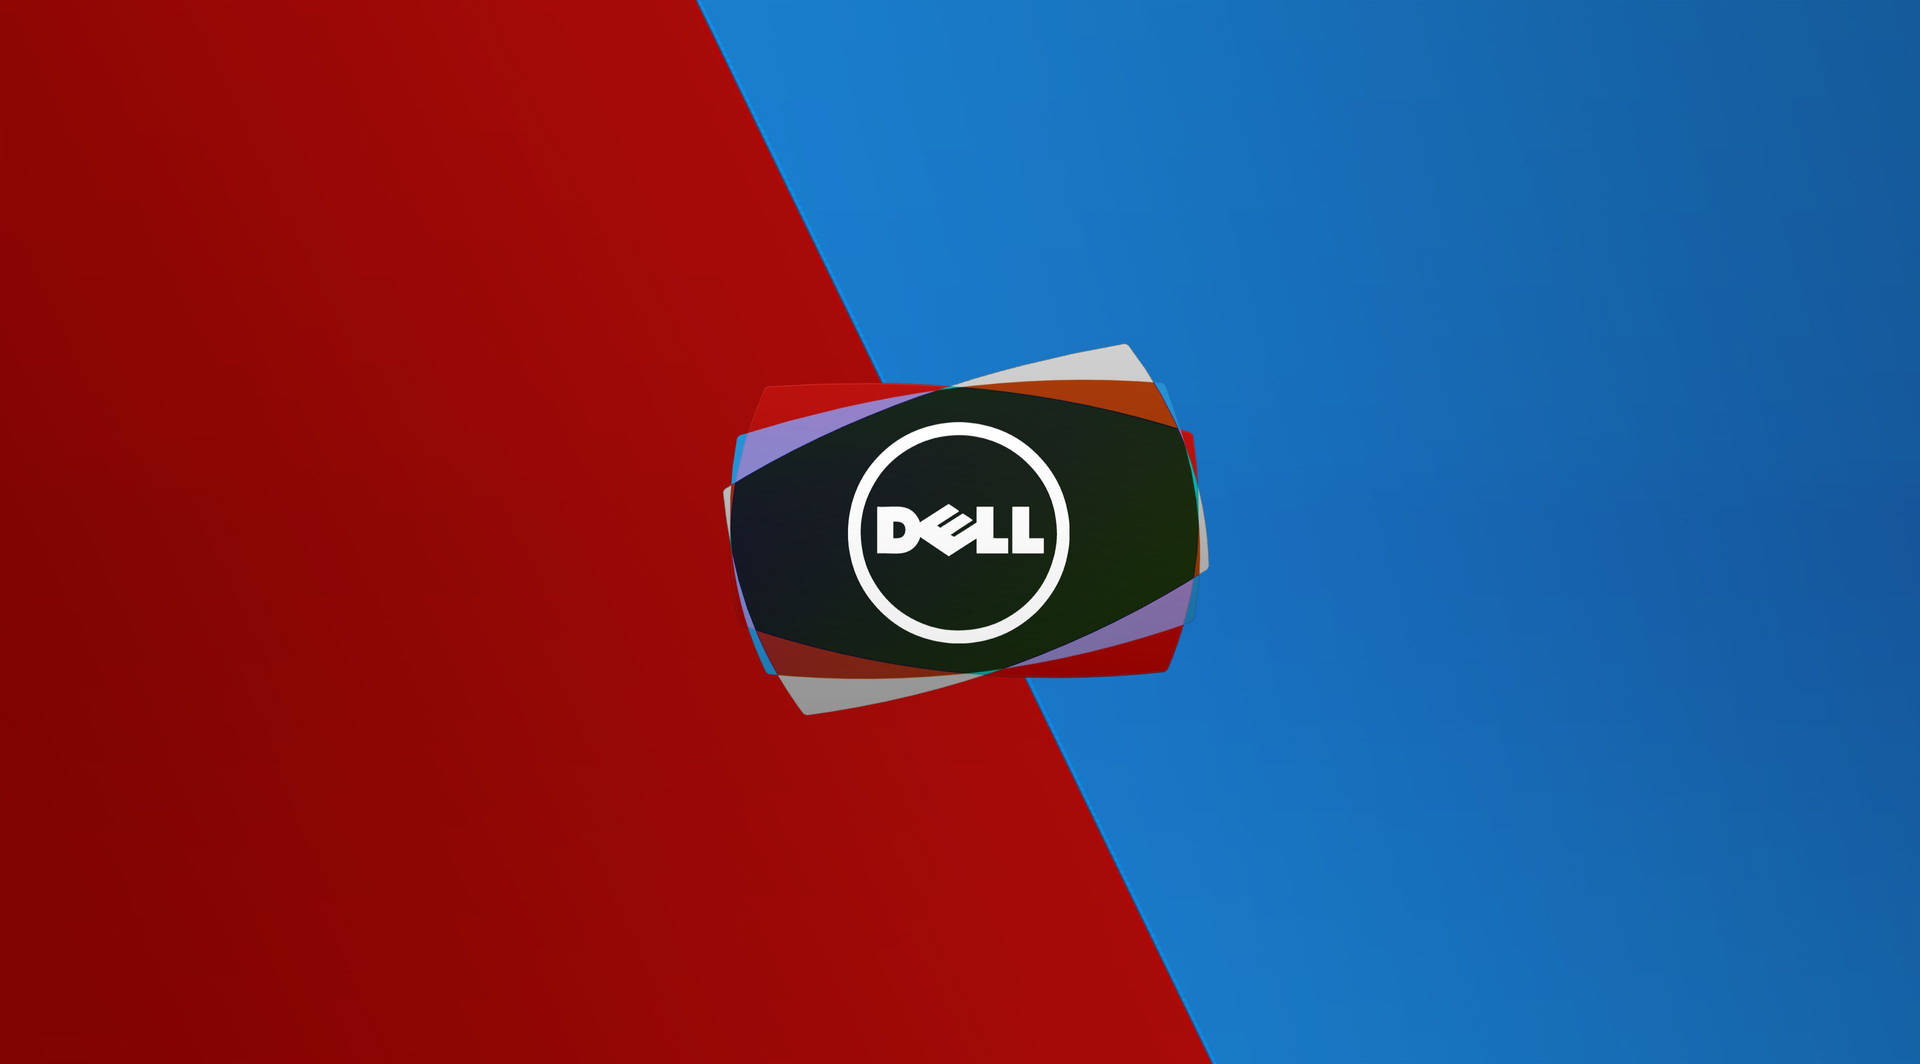 Dell 4k Logo And Colored Swatches Background